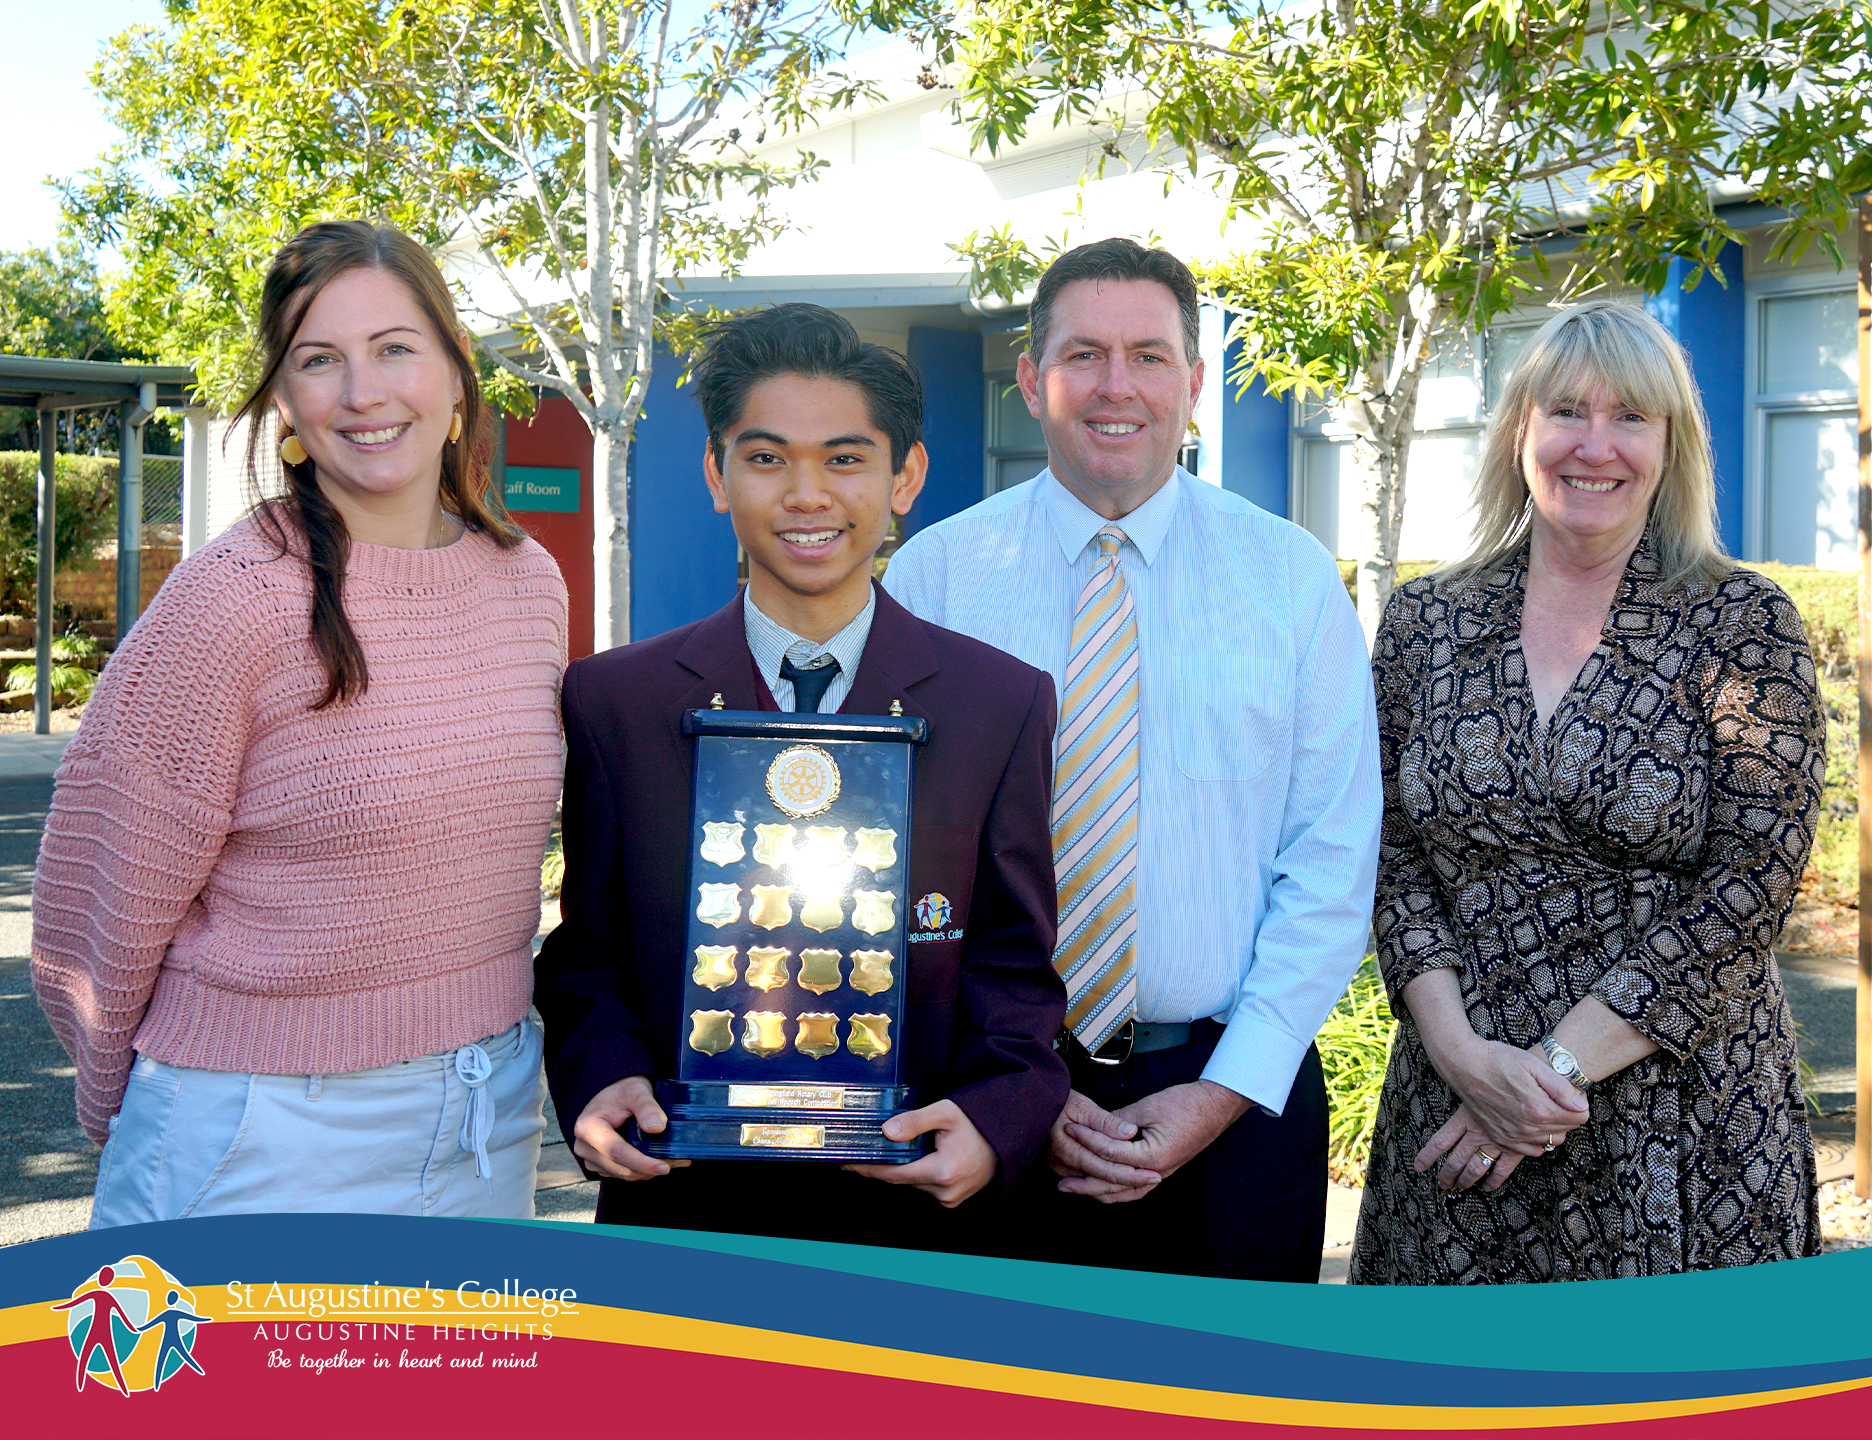 Louie Galman Rotary 4 Way Test Speaking Competition 1st Place.jpeg